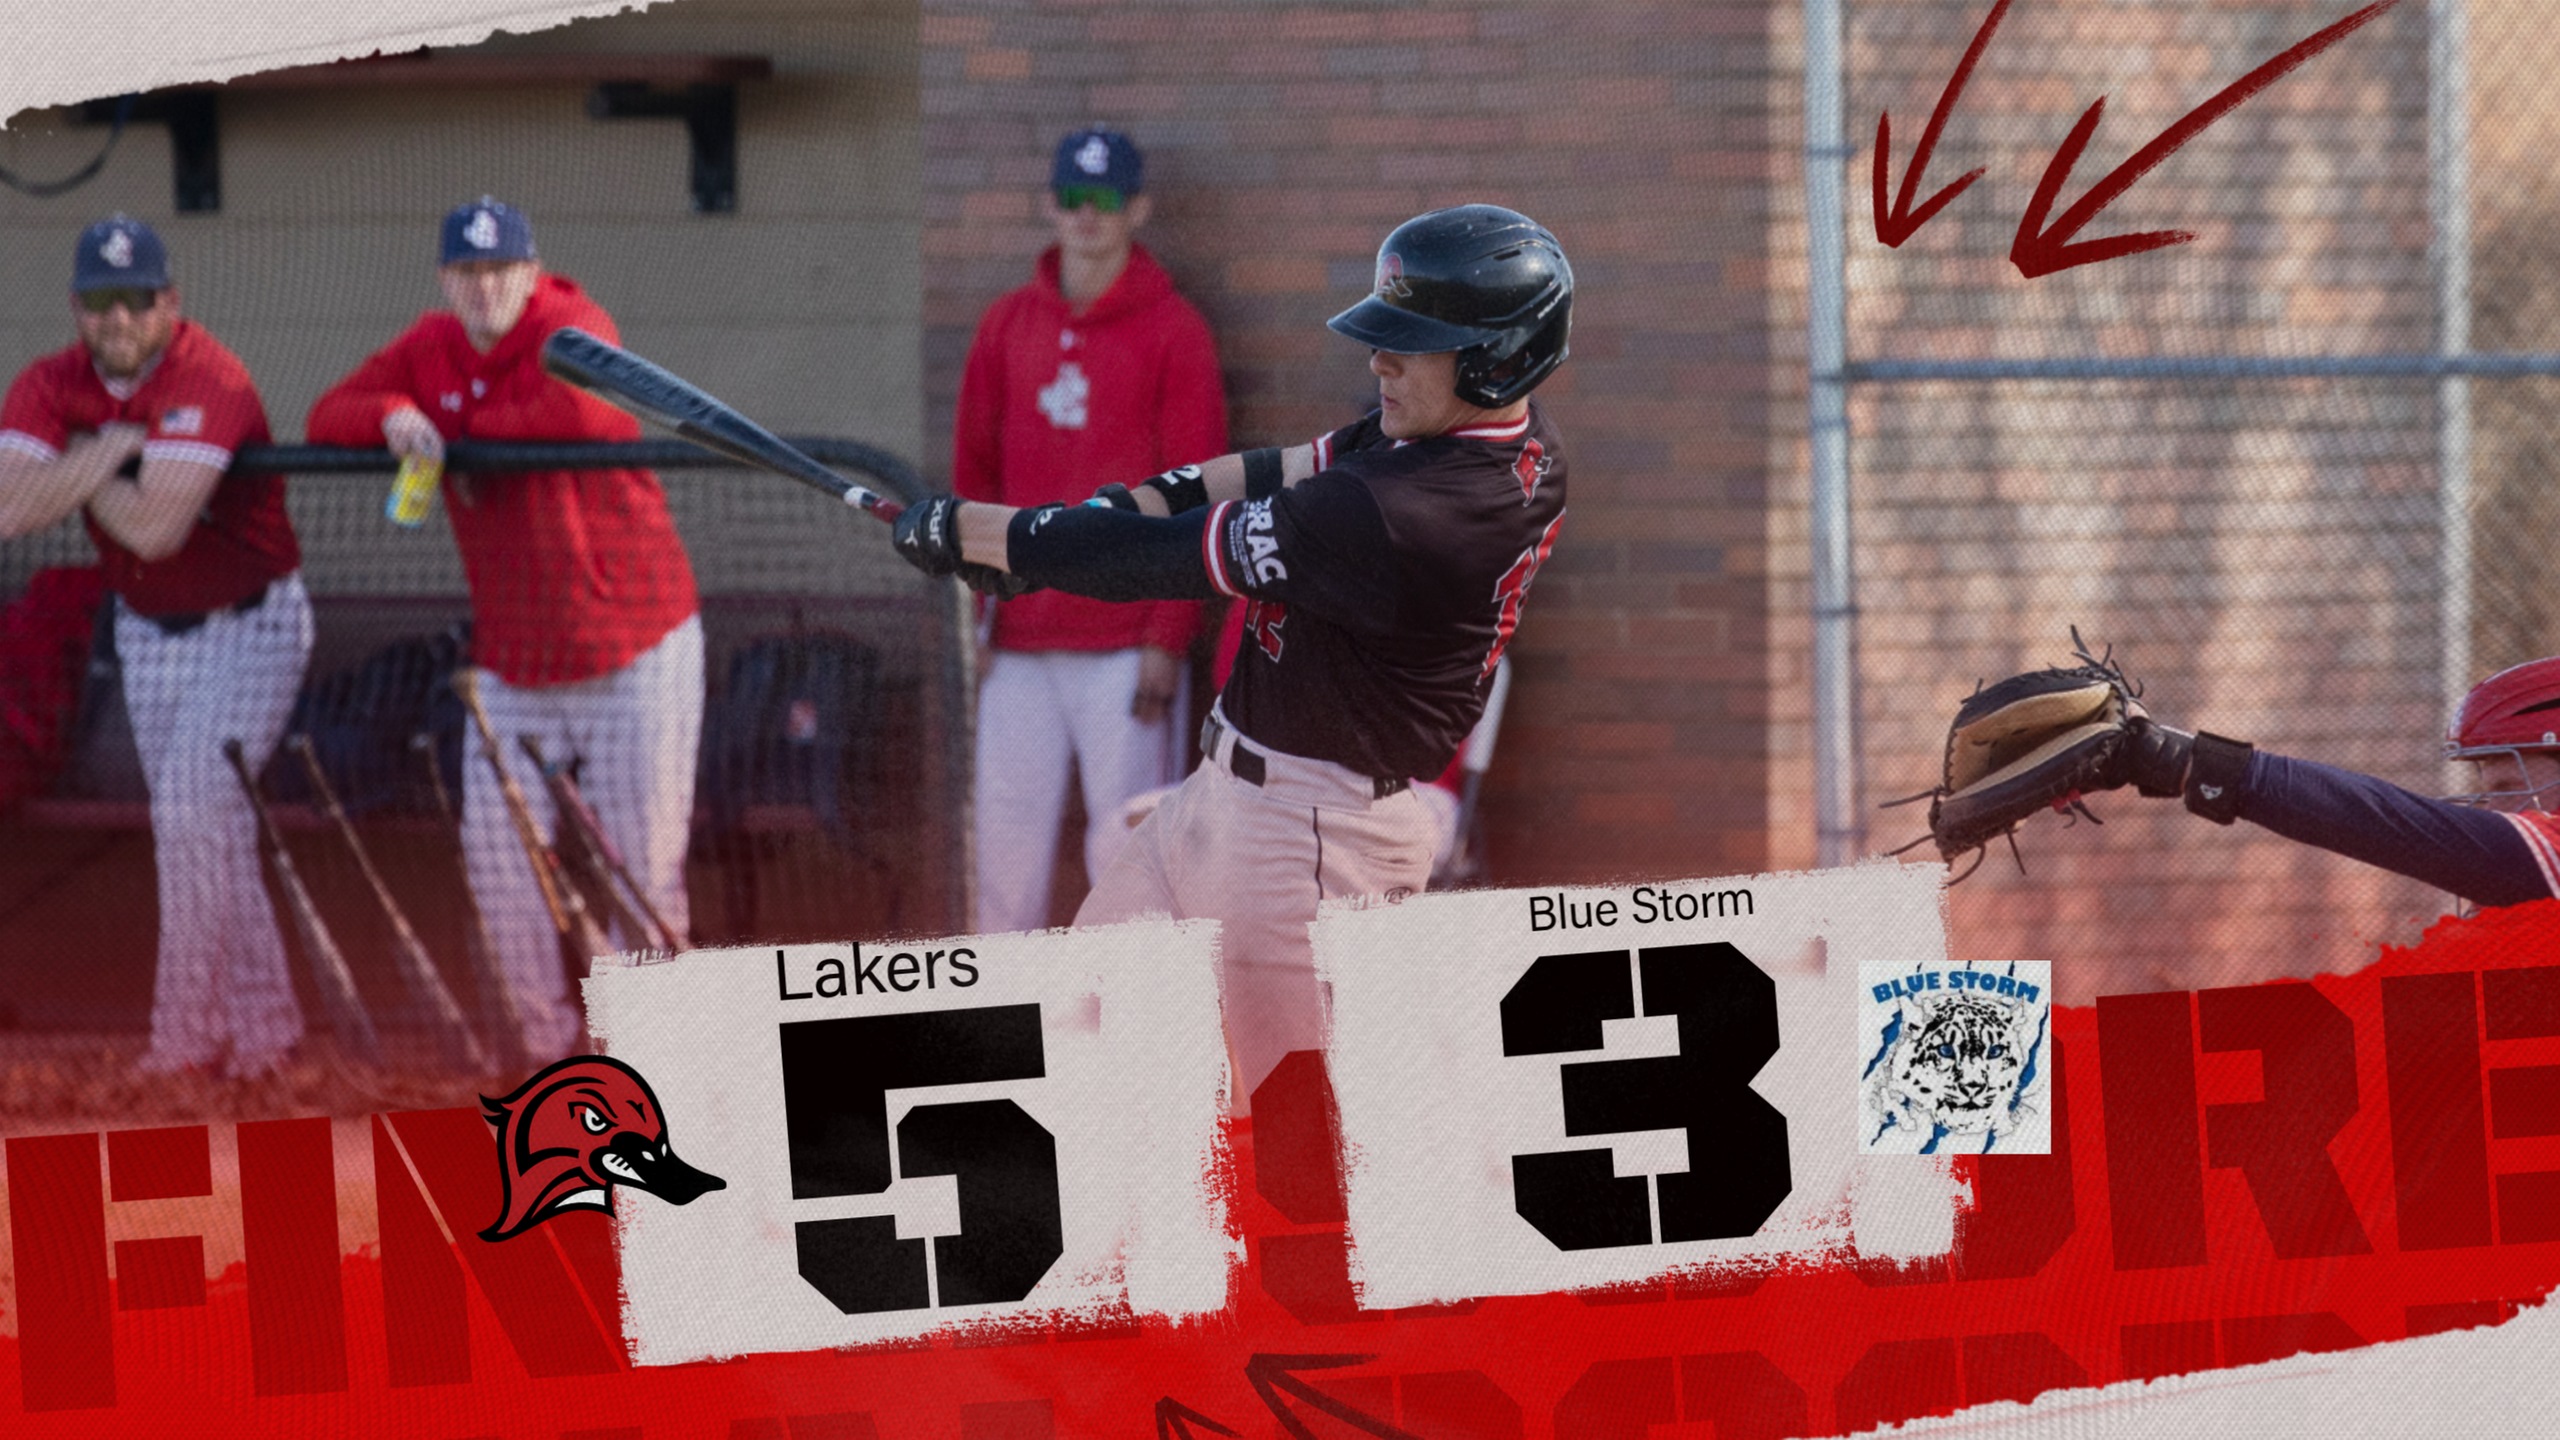 Lakers bounce back and split the double header behind Dicky Gonzalez and a go-ahead HR from Kiefer Tarnoki